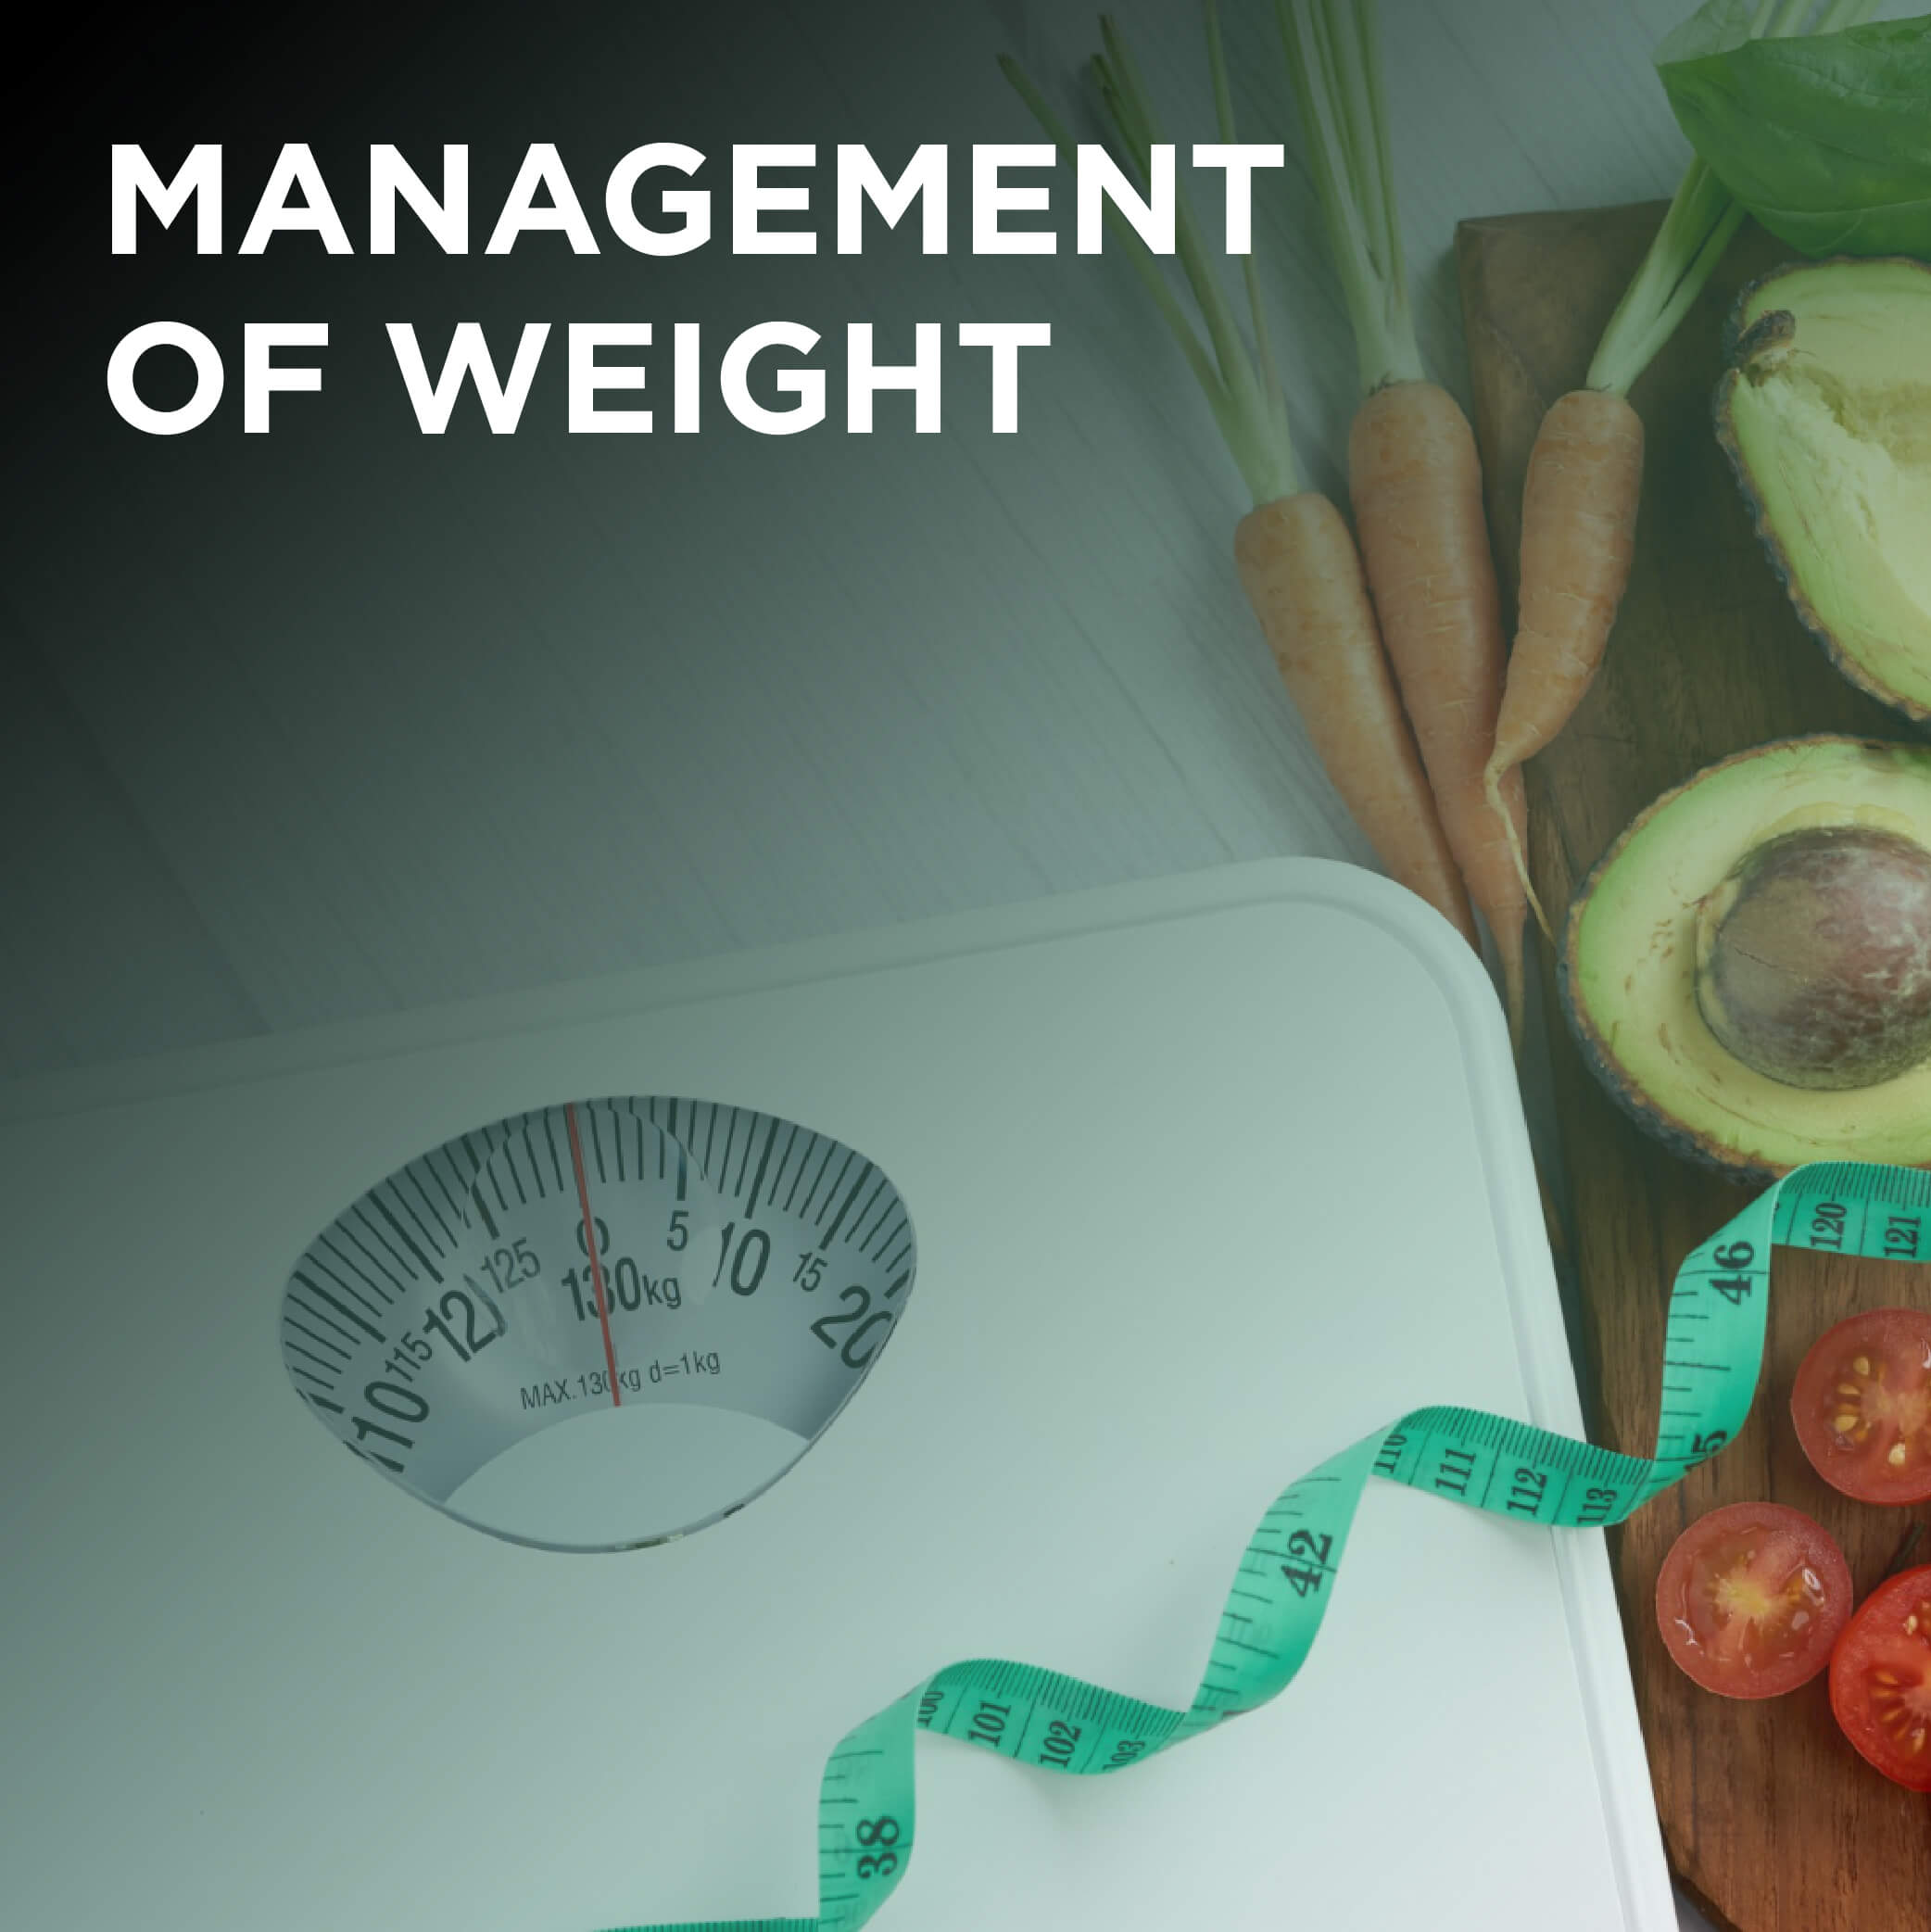  Management of Weight